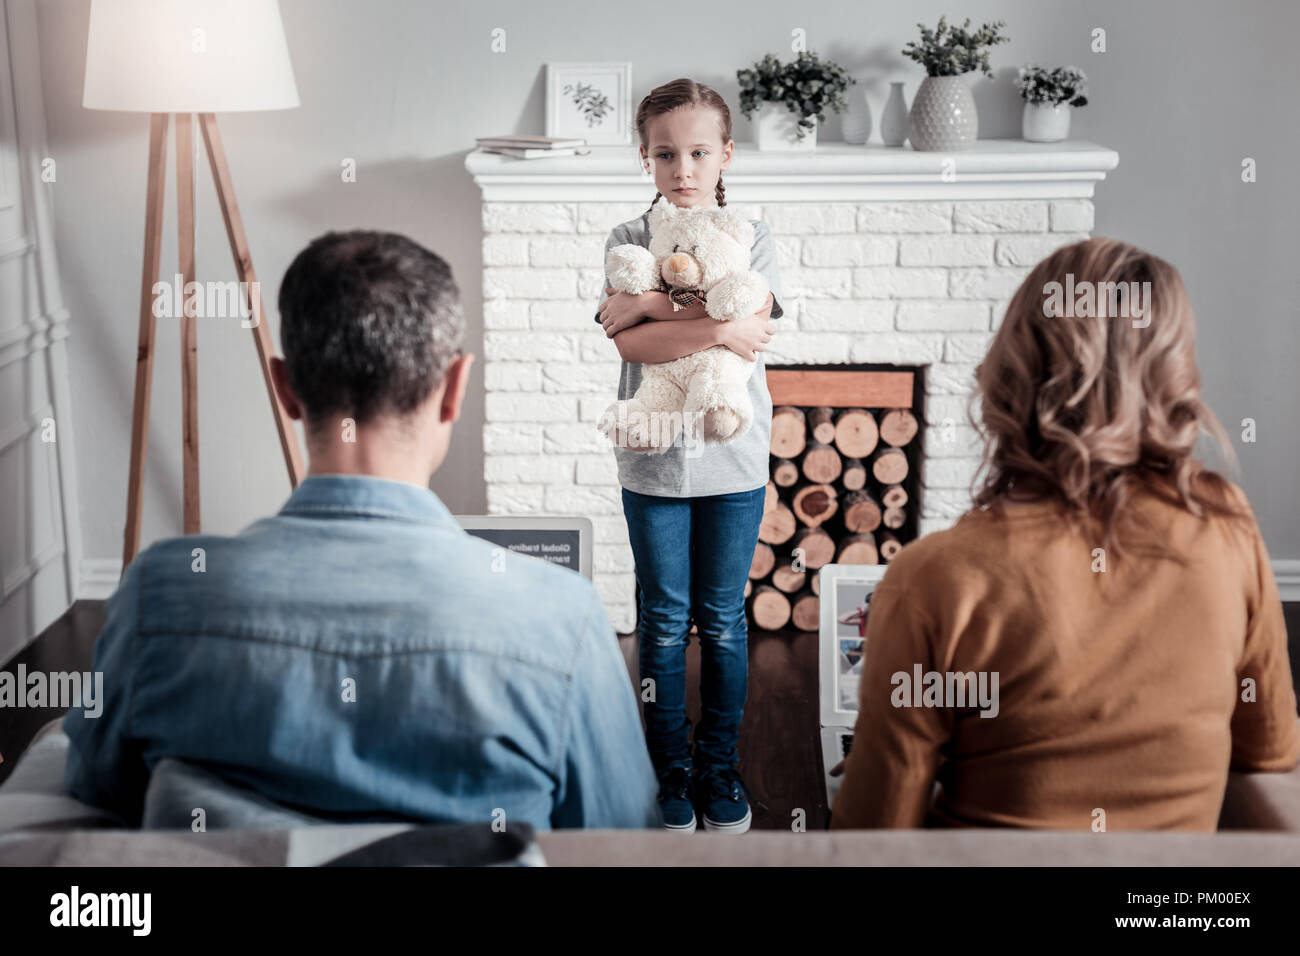 Lonely child standing in the middle of a room Stock Photo